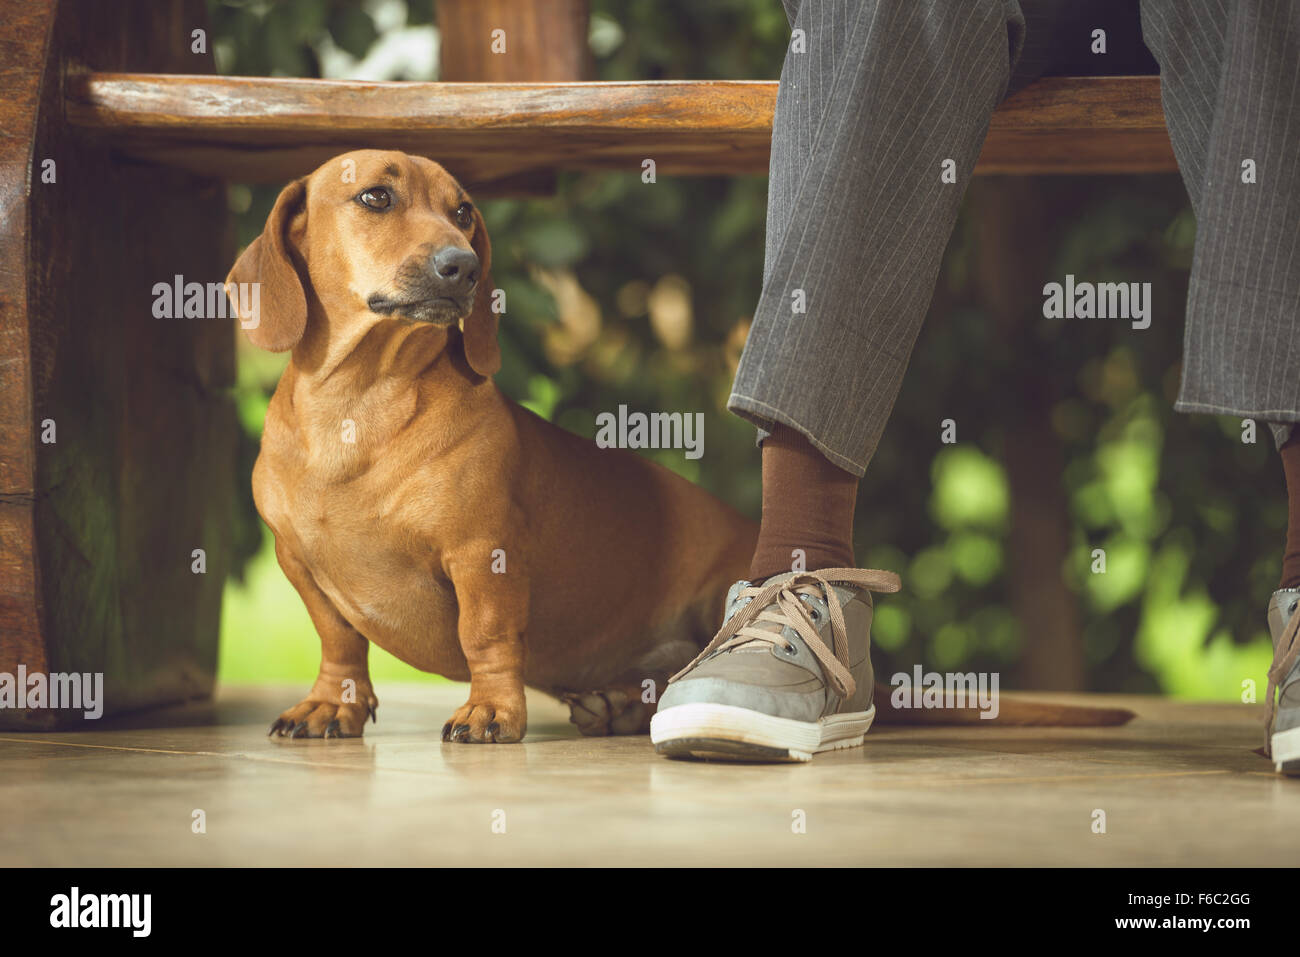 Dog beneath the wooden bench, making company to its owner. Stock Photo